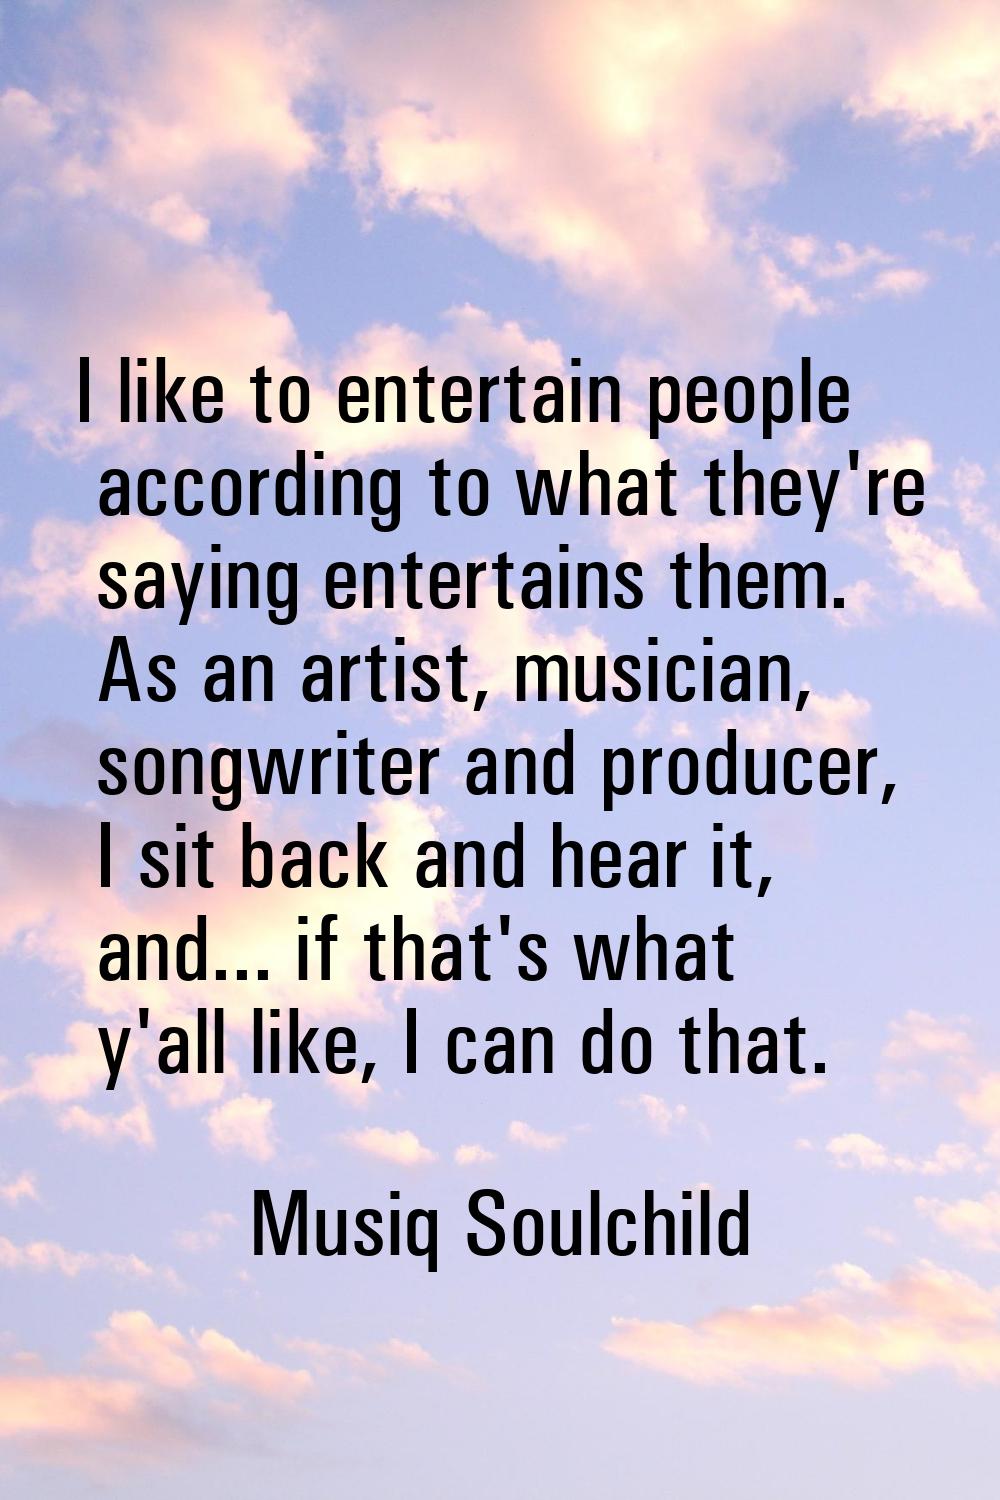 I like to entertain people according to what they're saying entertains them. As an artist, musician